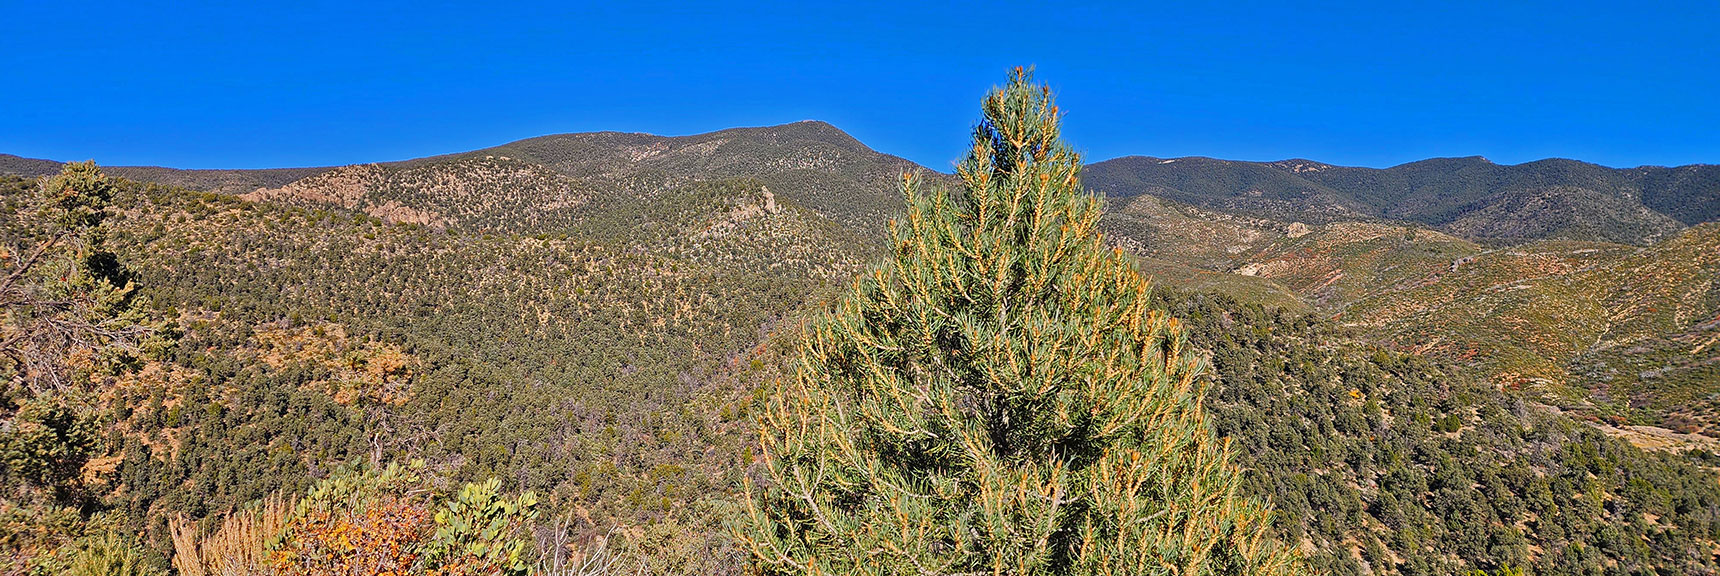 Southern High Point: 8,500ft, Same Height as La Madre Mountain! | Lovell Canyon Loop Trail | Lovell Canyon Nevada